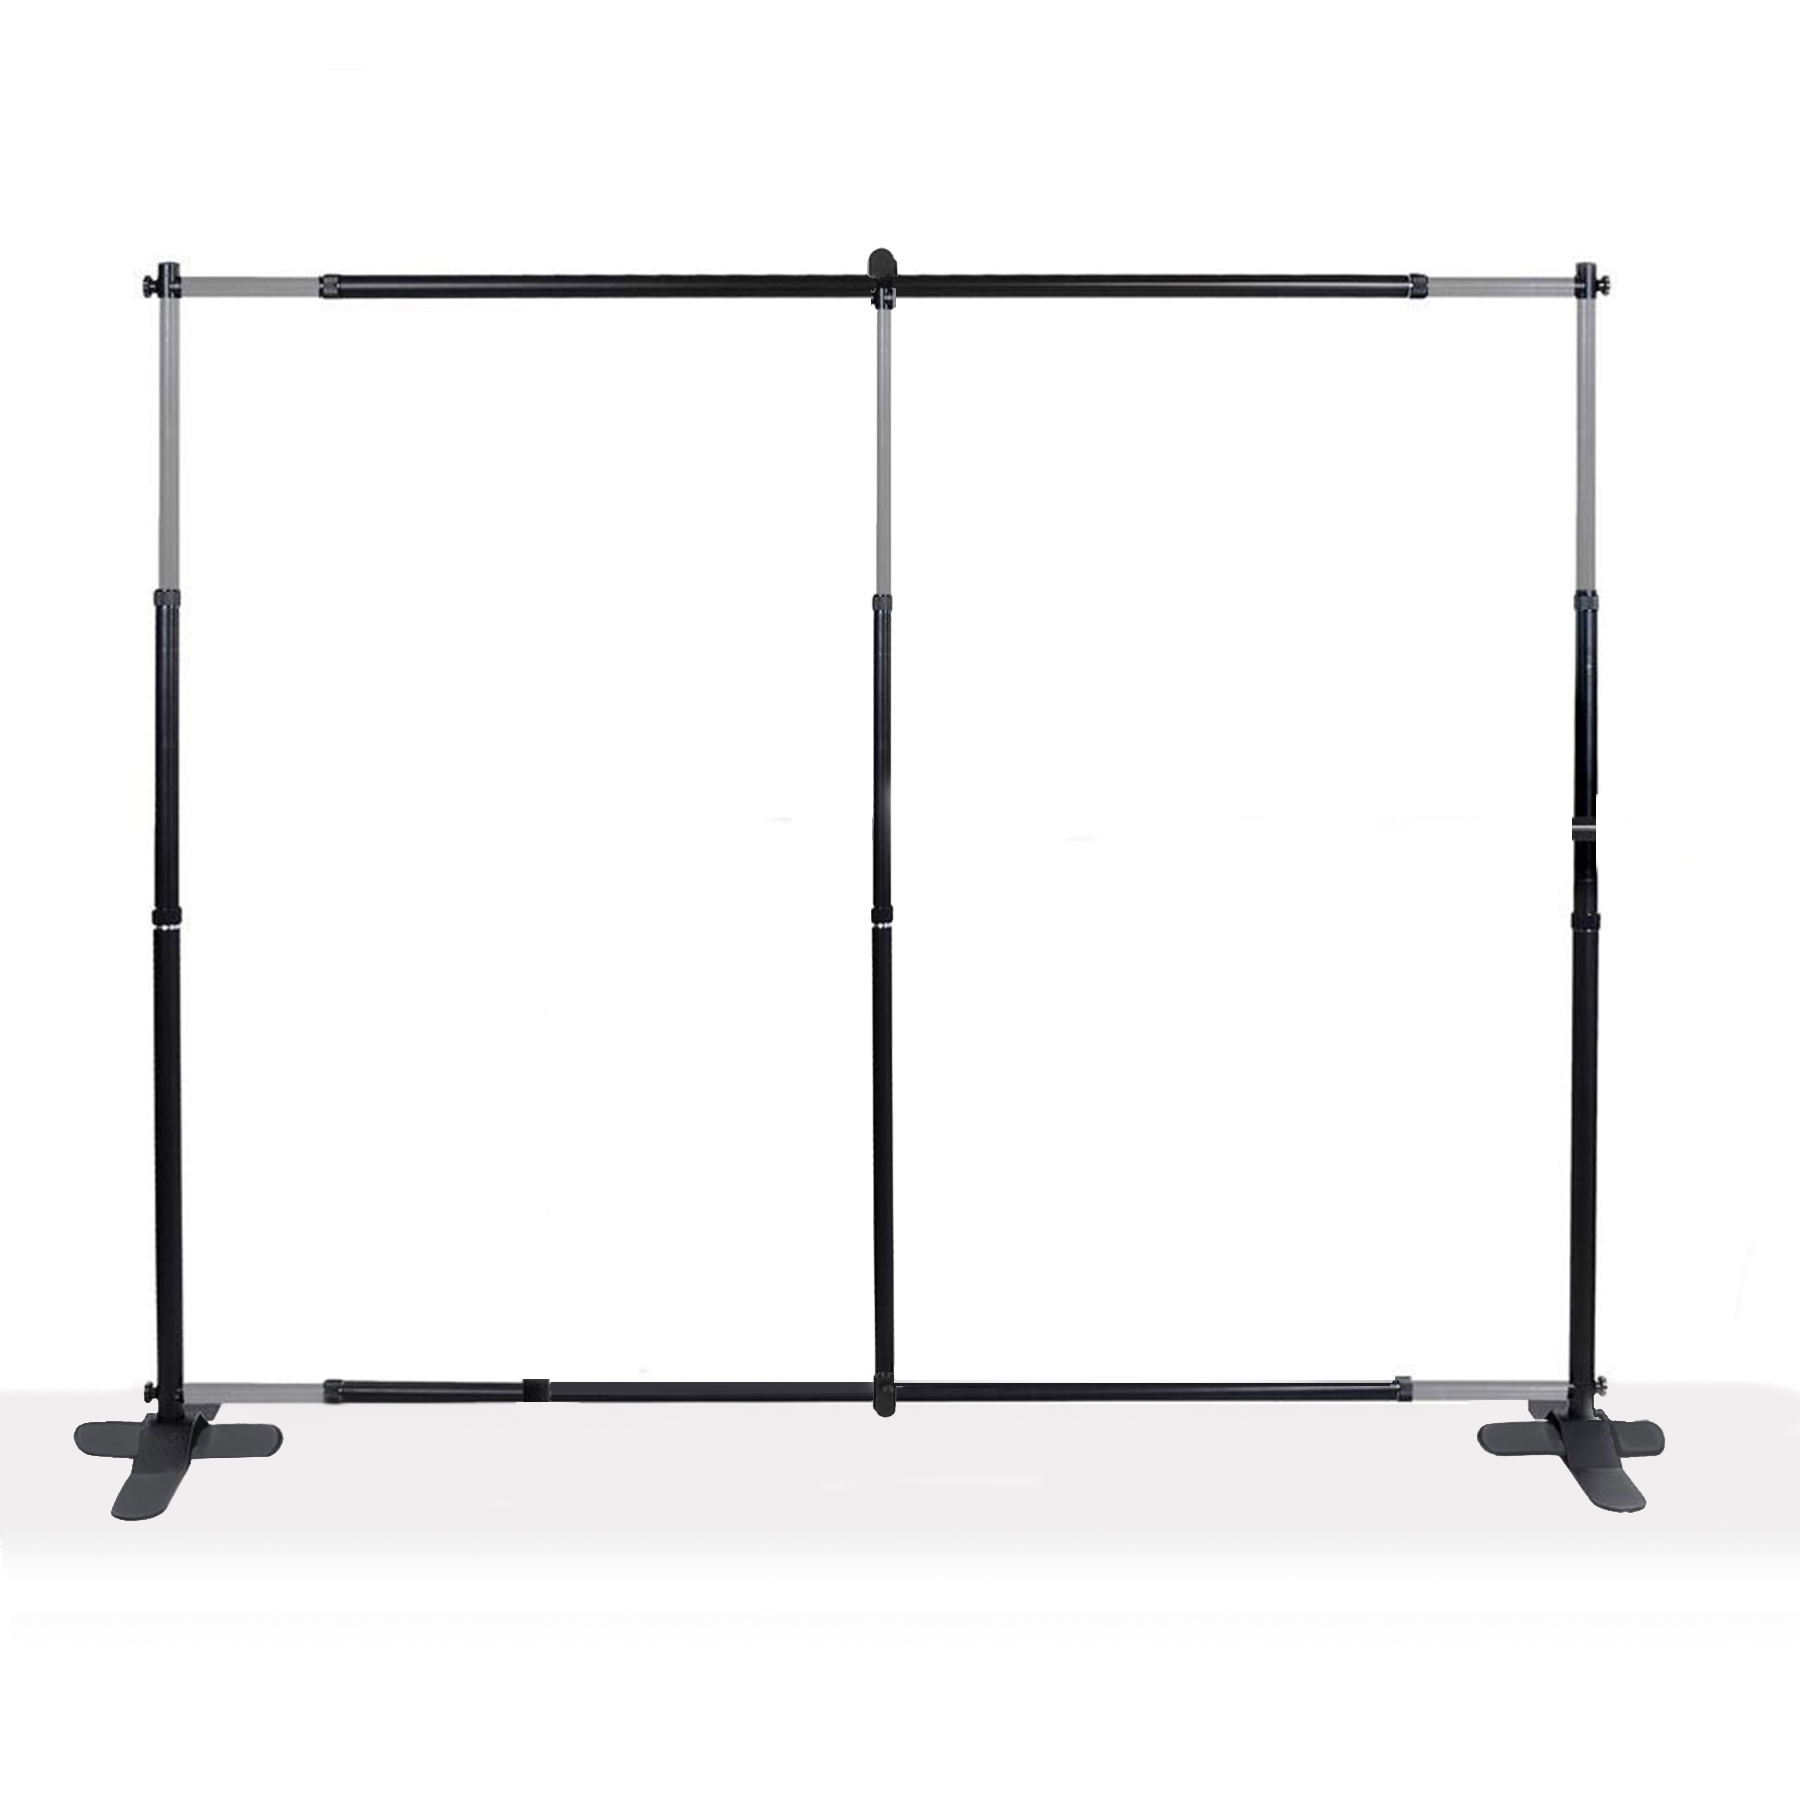 10' X 8' Heavy Duty Telescopic Banner Stand Step and Repeat Fabric Printing 